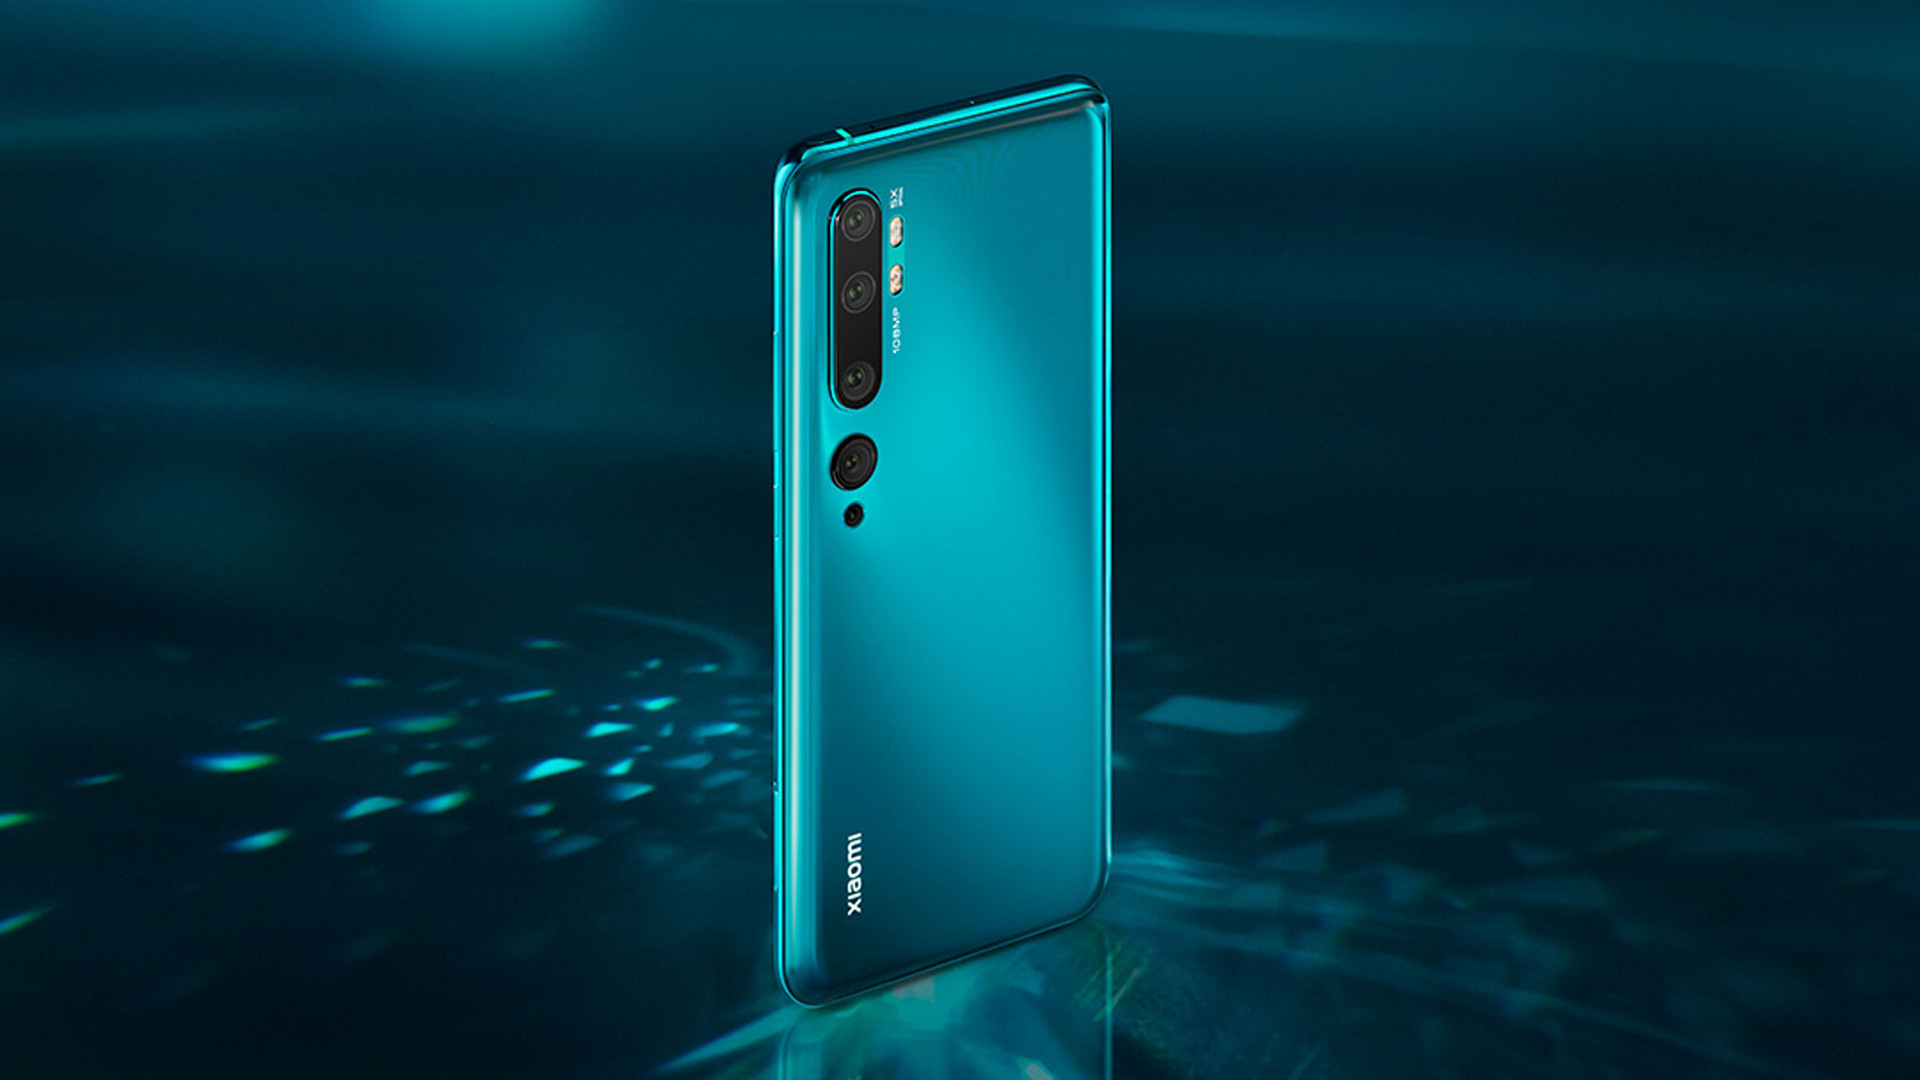 Xiaomi Mi CC9 Pro is now available in China